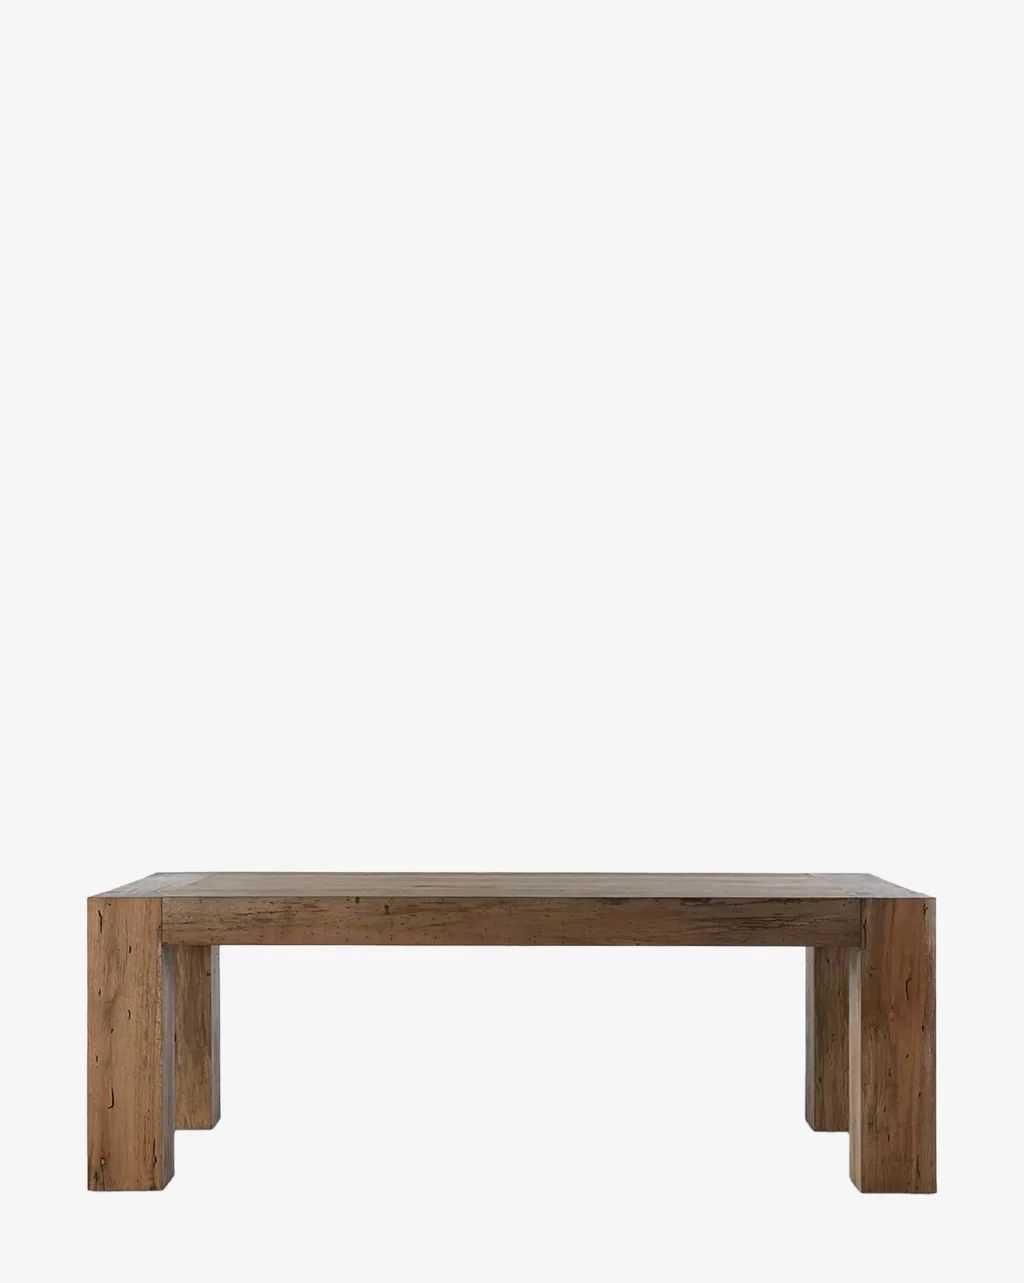 Clellan Dining Table | McGee & Co.